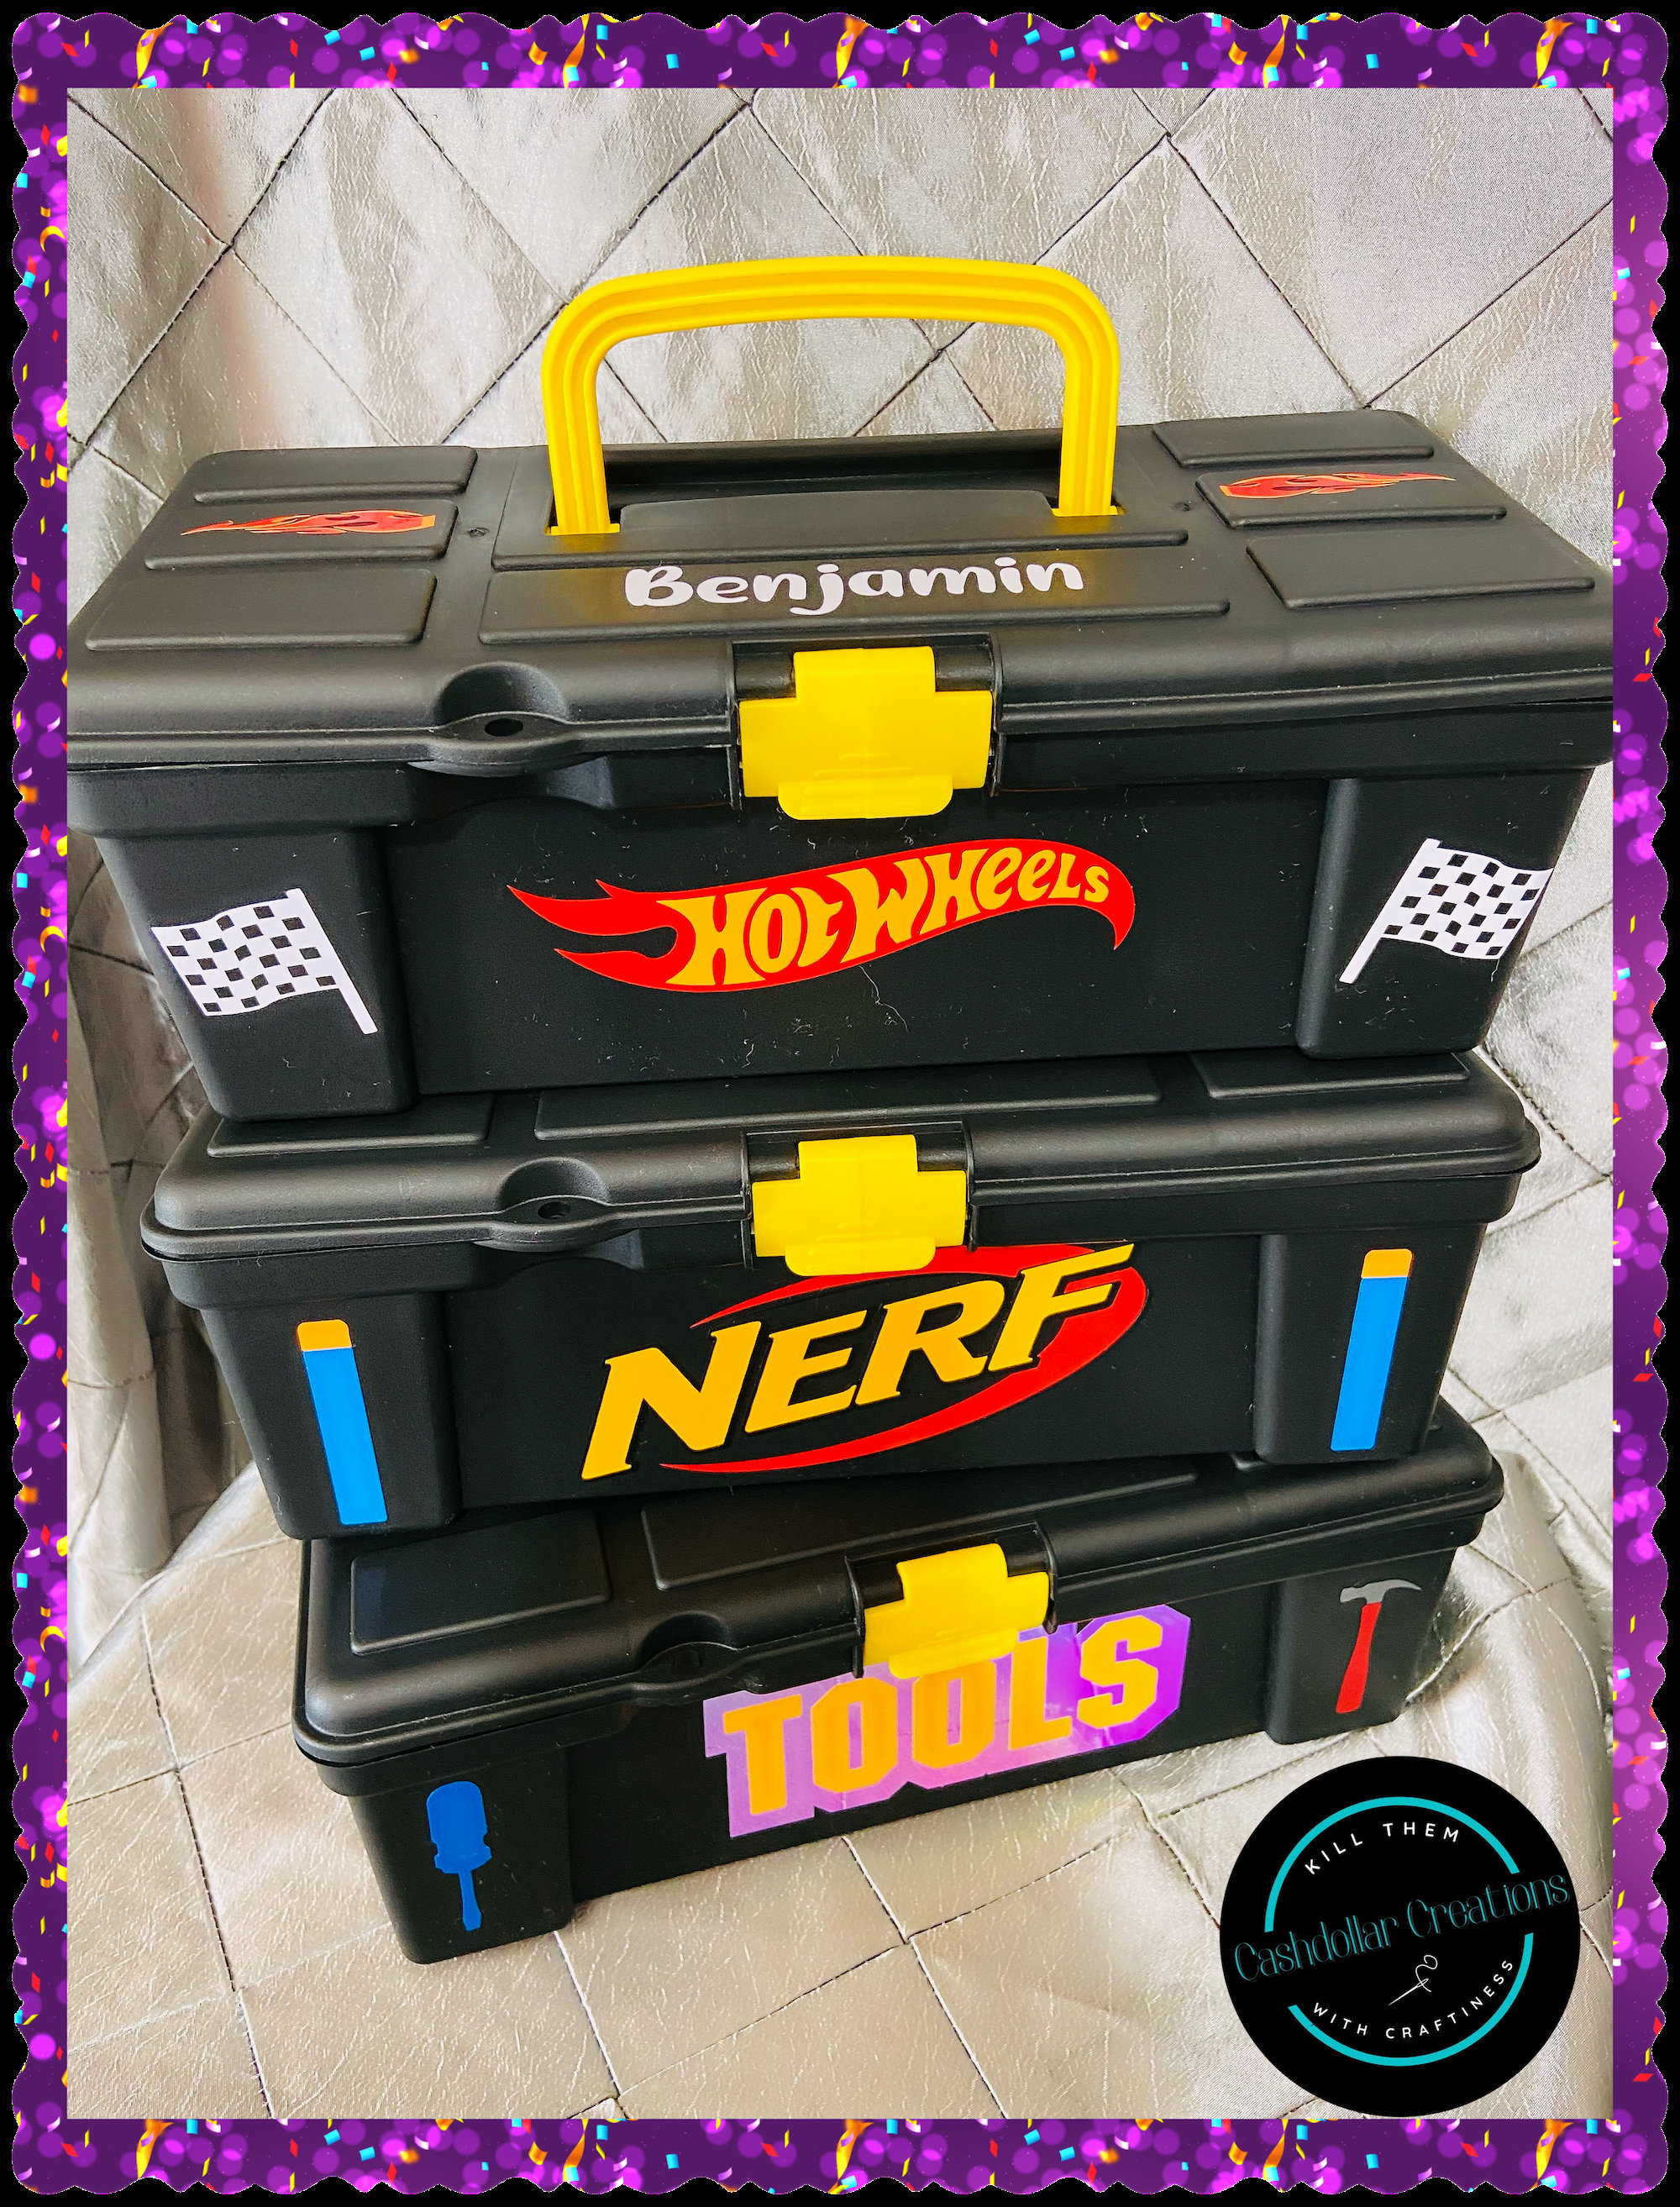 FULLCASE Toys Organizer Storage Compatible with Hot Wheels Car